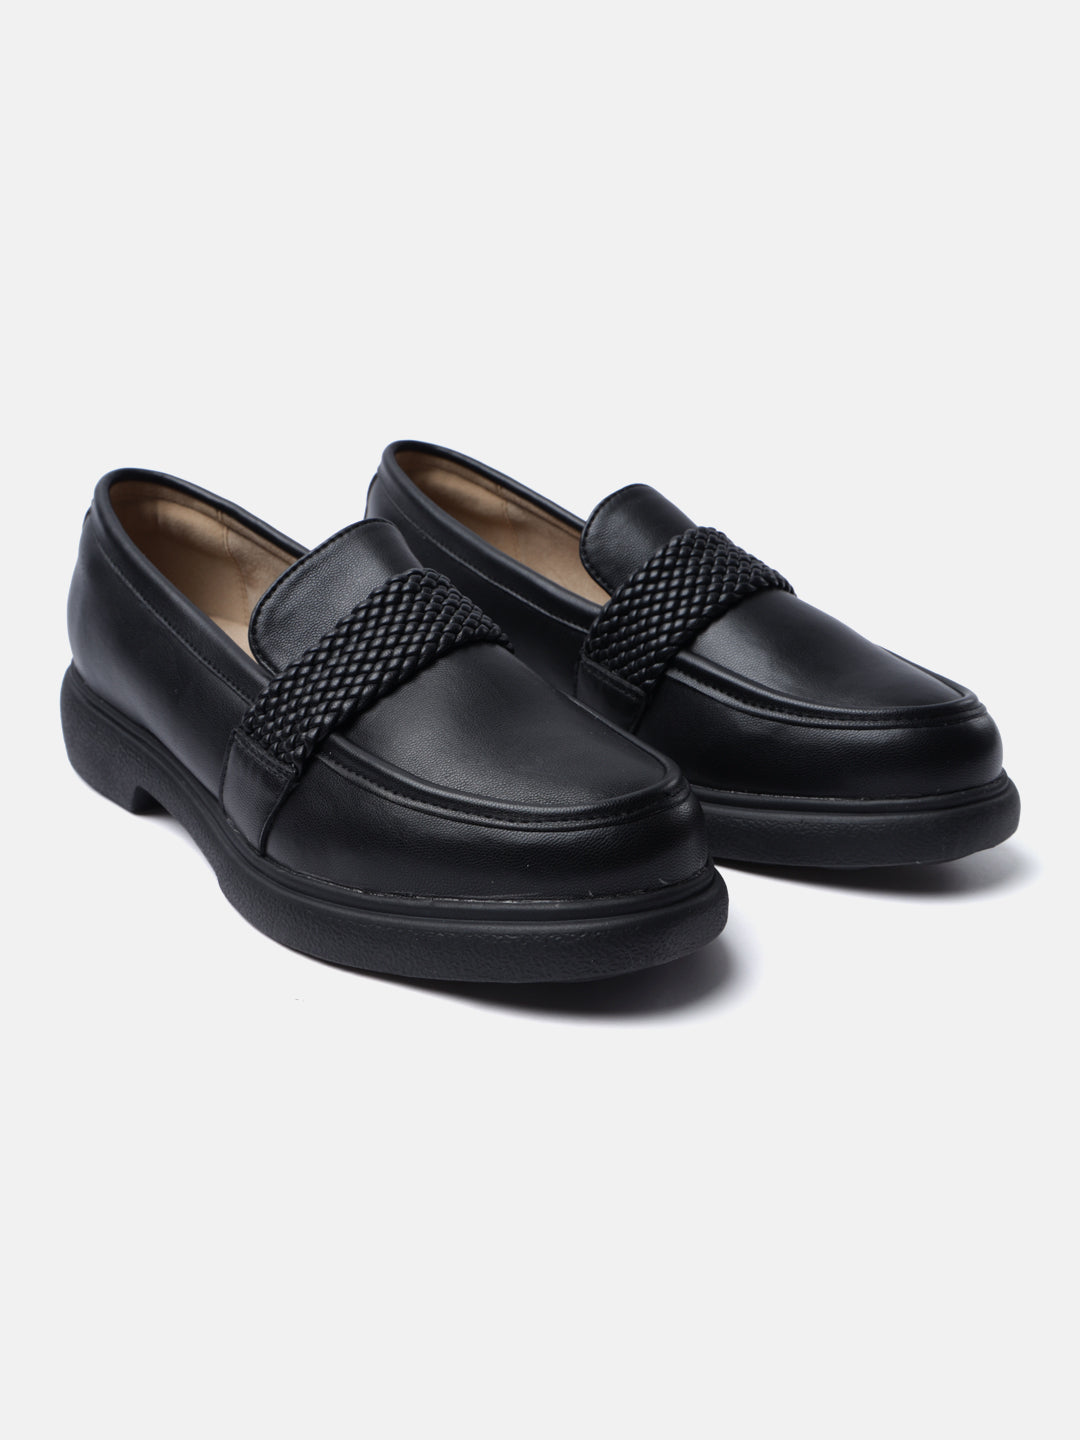 Genelle Black Casual Loafers